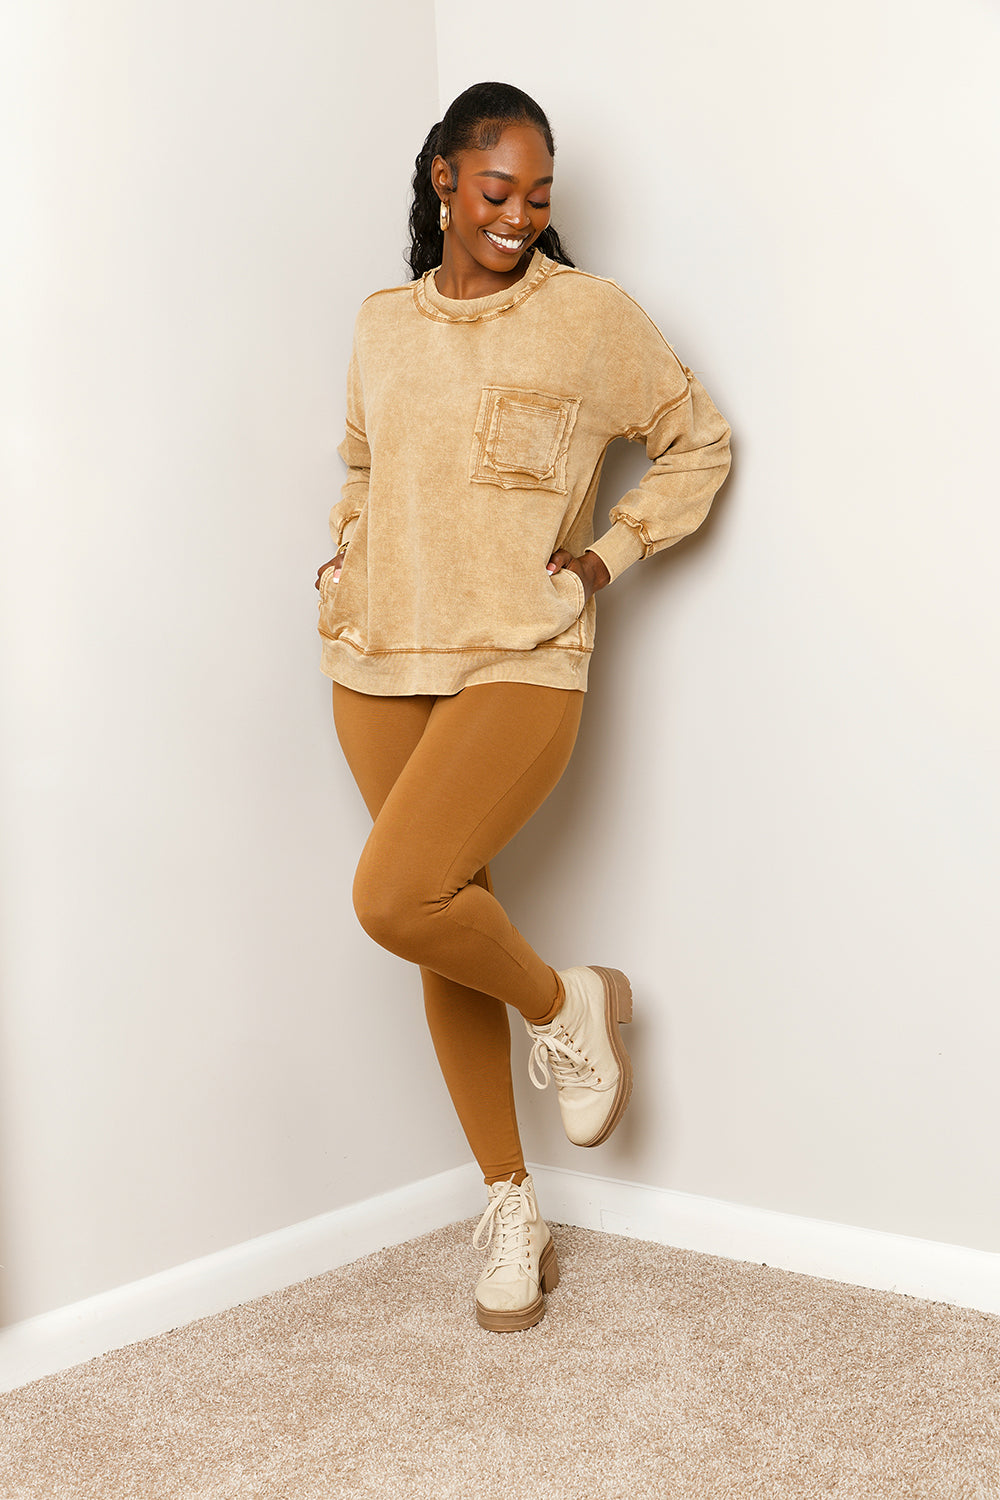 FRENCH TERRY ACID WASH RAW EDGE PULLOVER with POCKETS LEGGING SET | CAMEL TAN